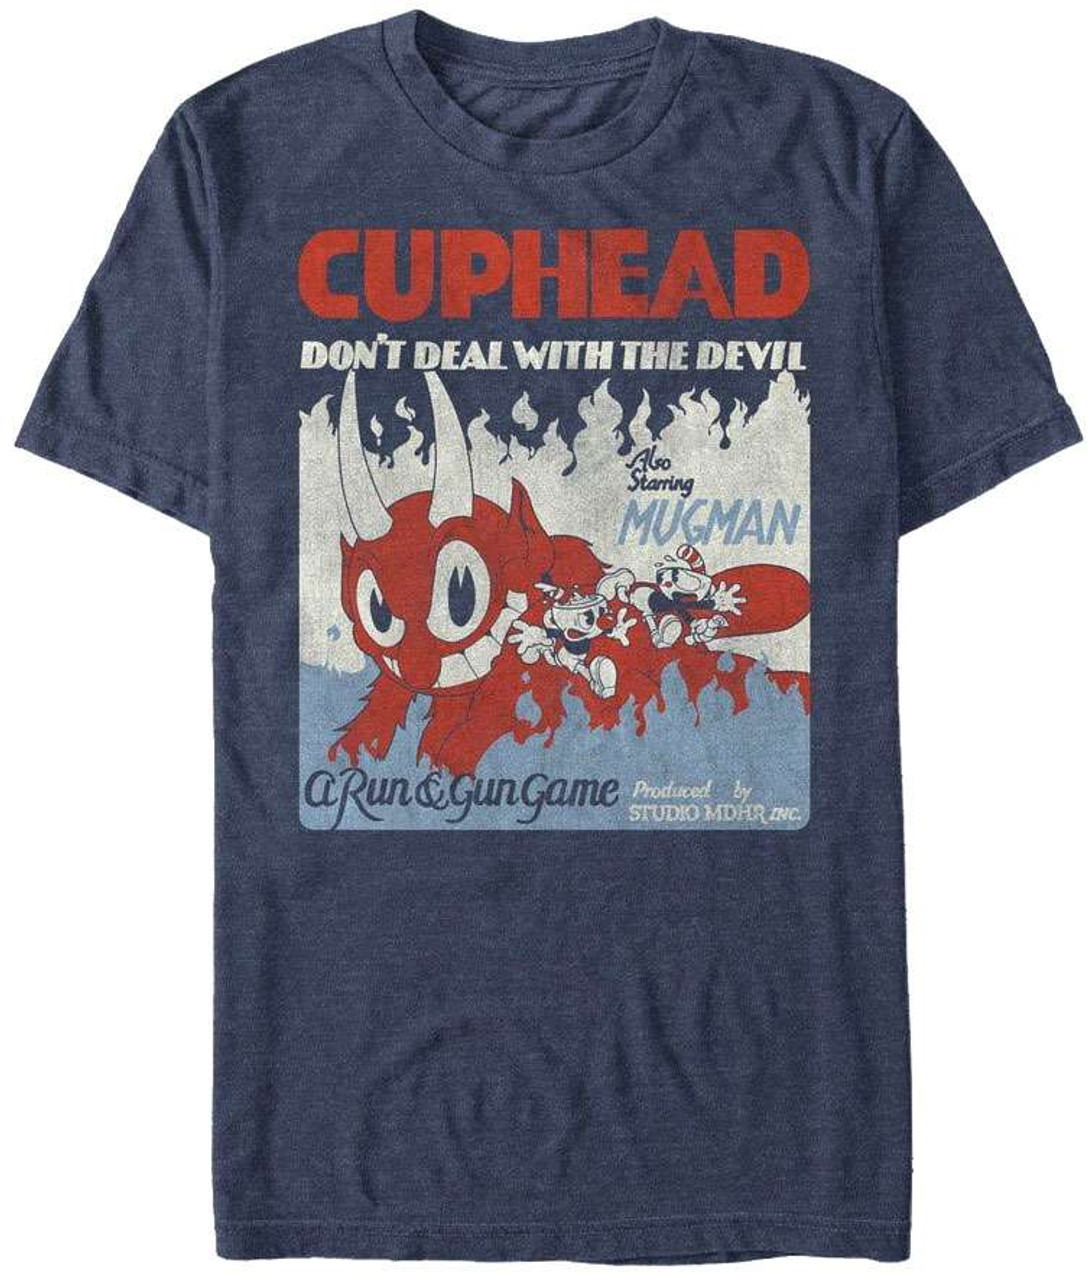 Cuphead Run Gun Game T Shirt Medium Fifth Sun Graphics Toywiz - bendy and the ink machine bow tie minnie mouse t shirt roblox